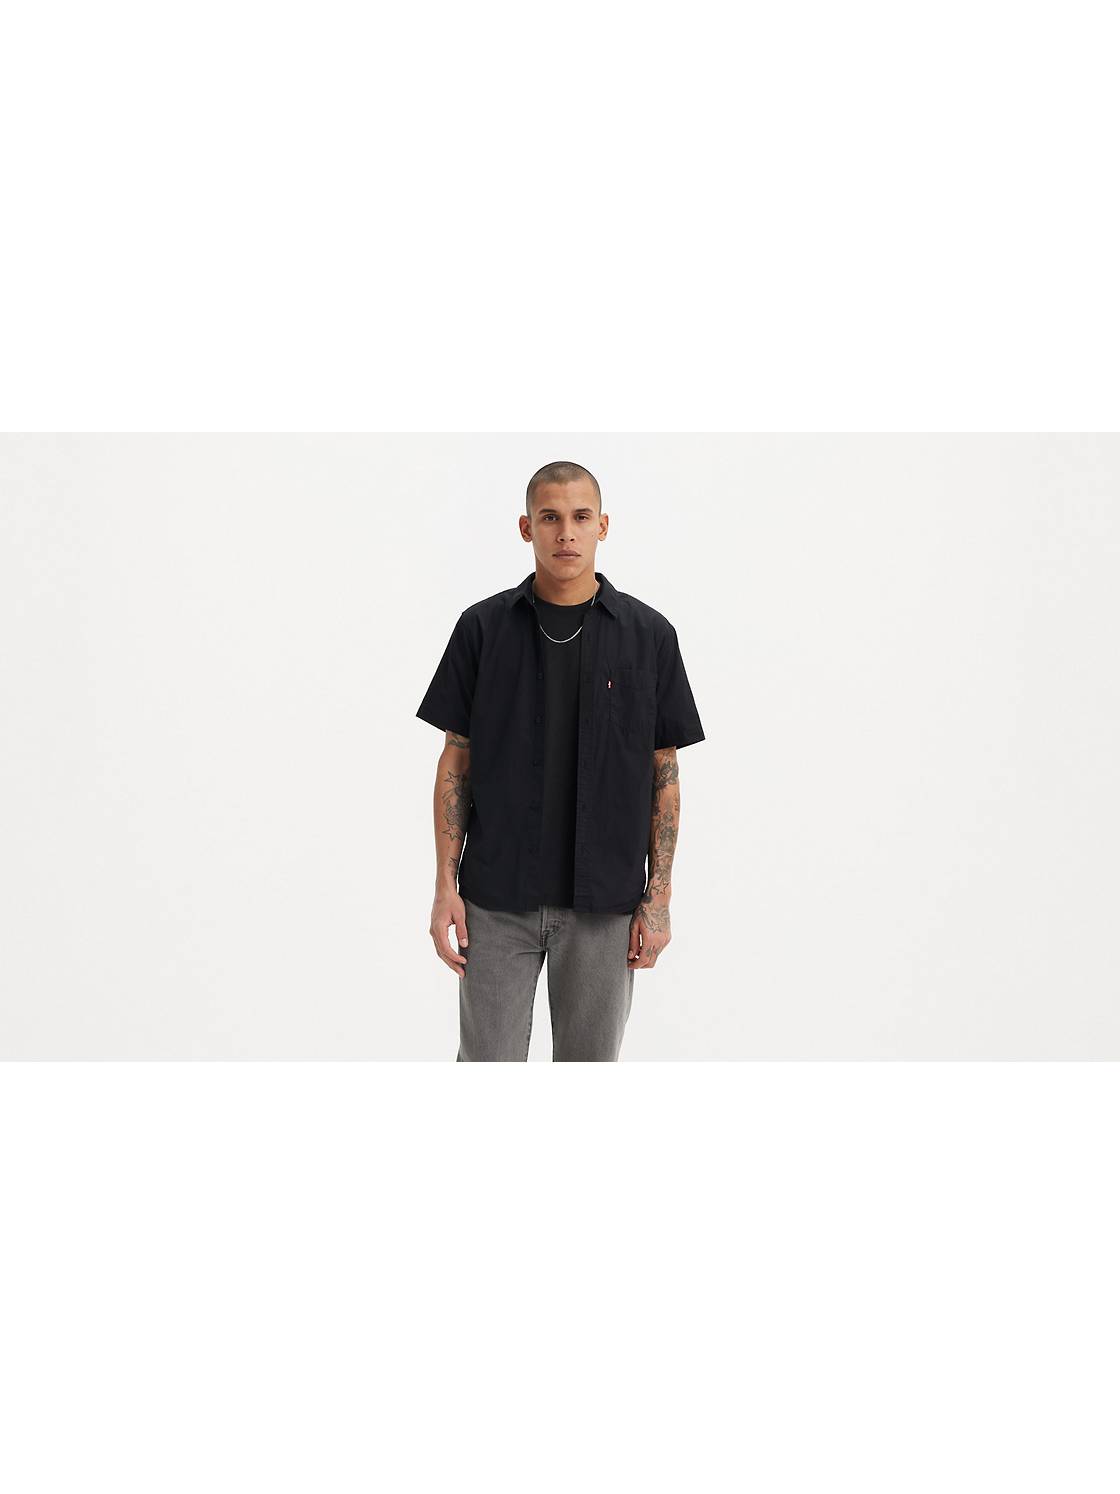 Button-Up Shirts For Men: Shop Long & Short Sleeves | Levi'S® Us